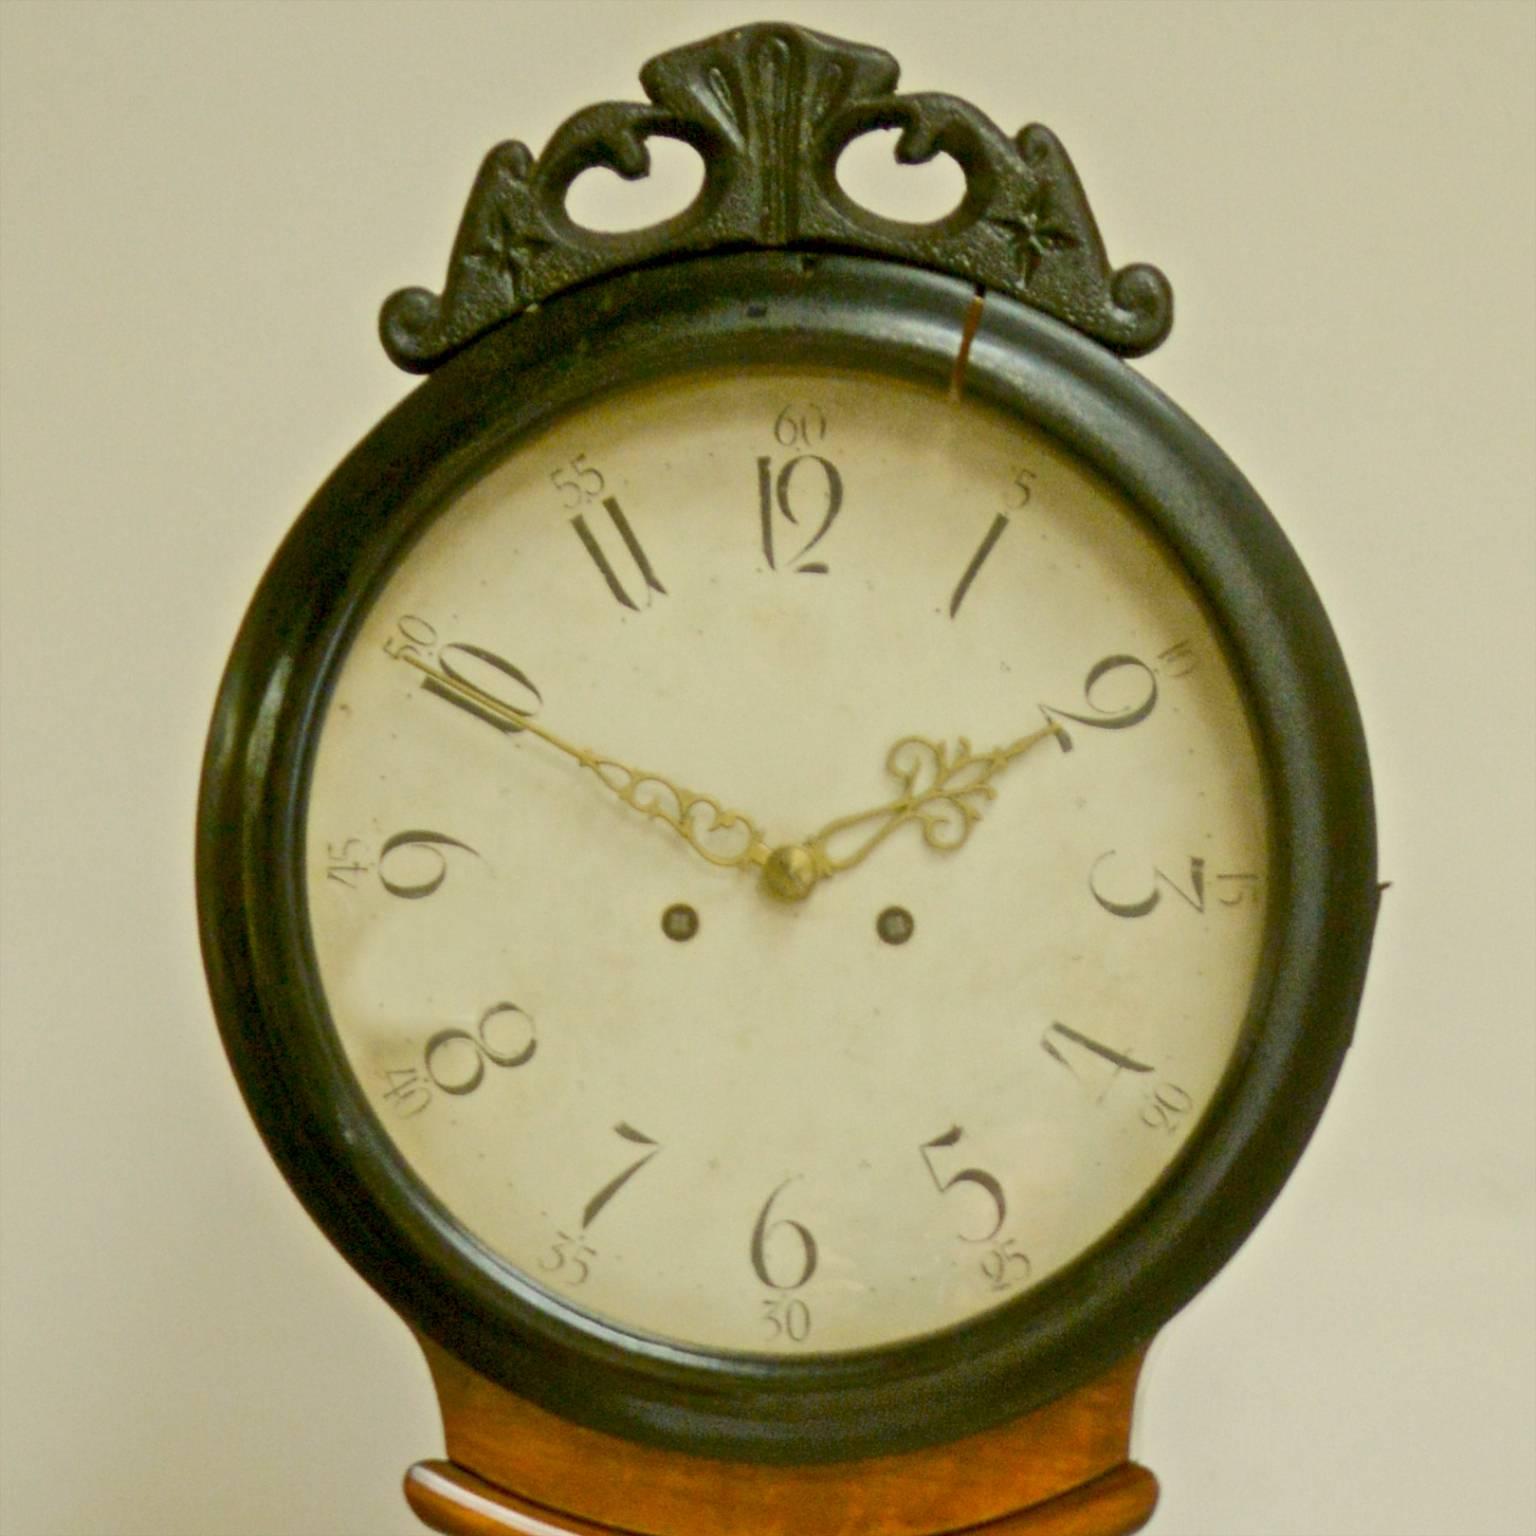 Rare example of a decorative 1800s antique Swedish mora clock in the Biedermeier style with ornate sunrise motif at the waist and ormolu style hood with stunning hand-carved detailing to the body. You very rarely find these clocks in this style or